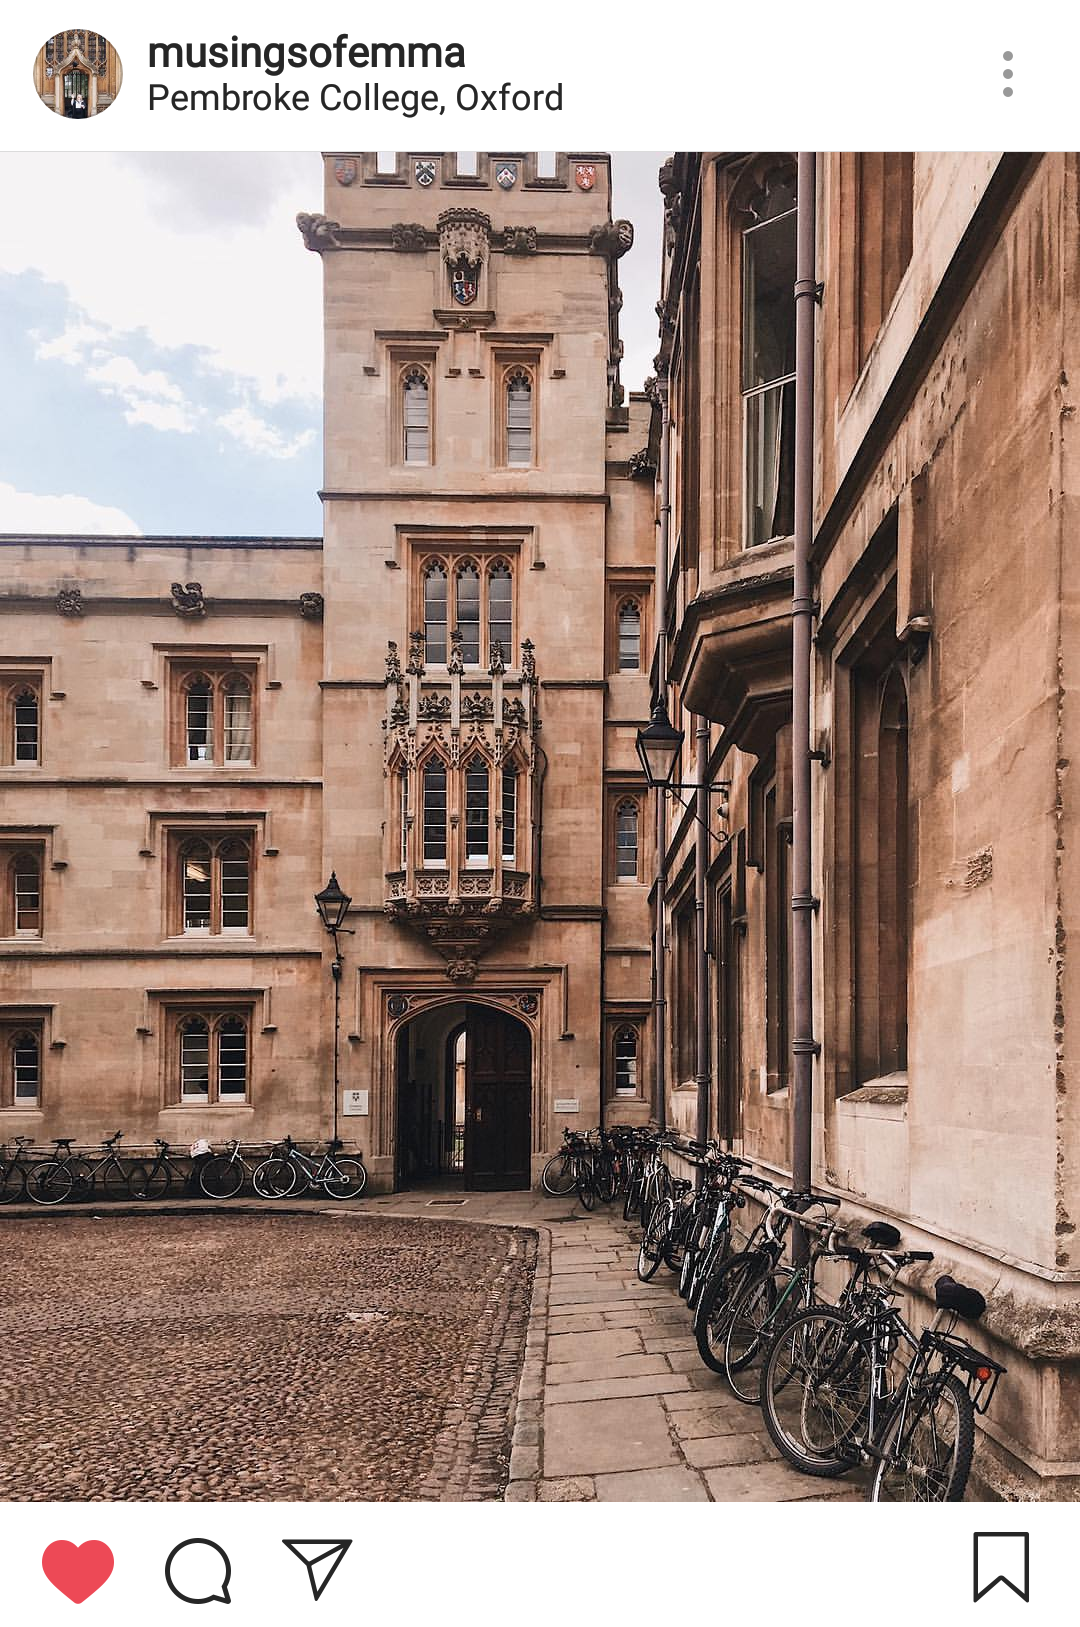 make you want to visit Oxford